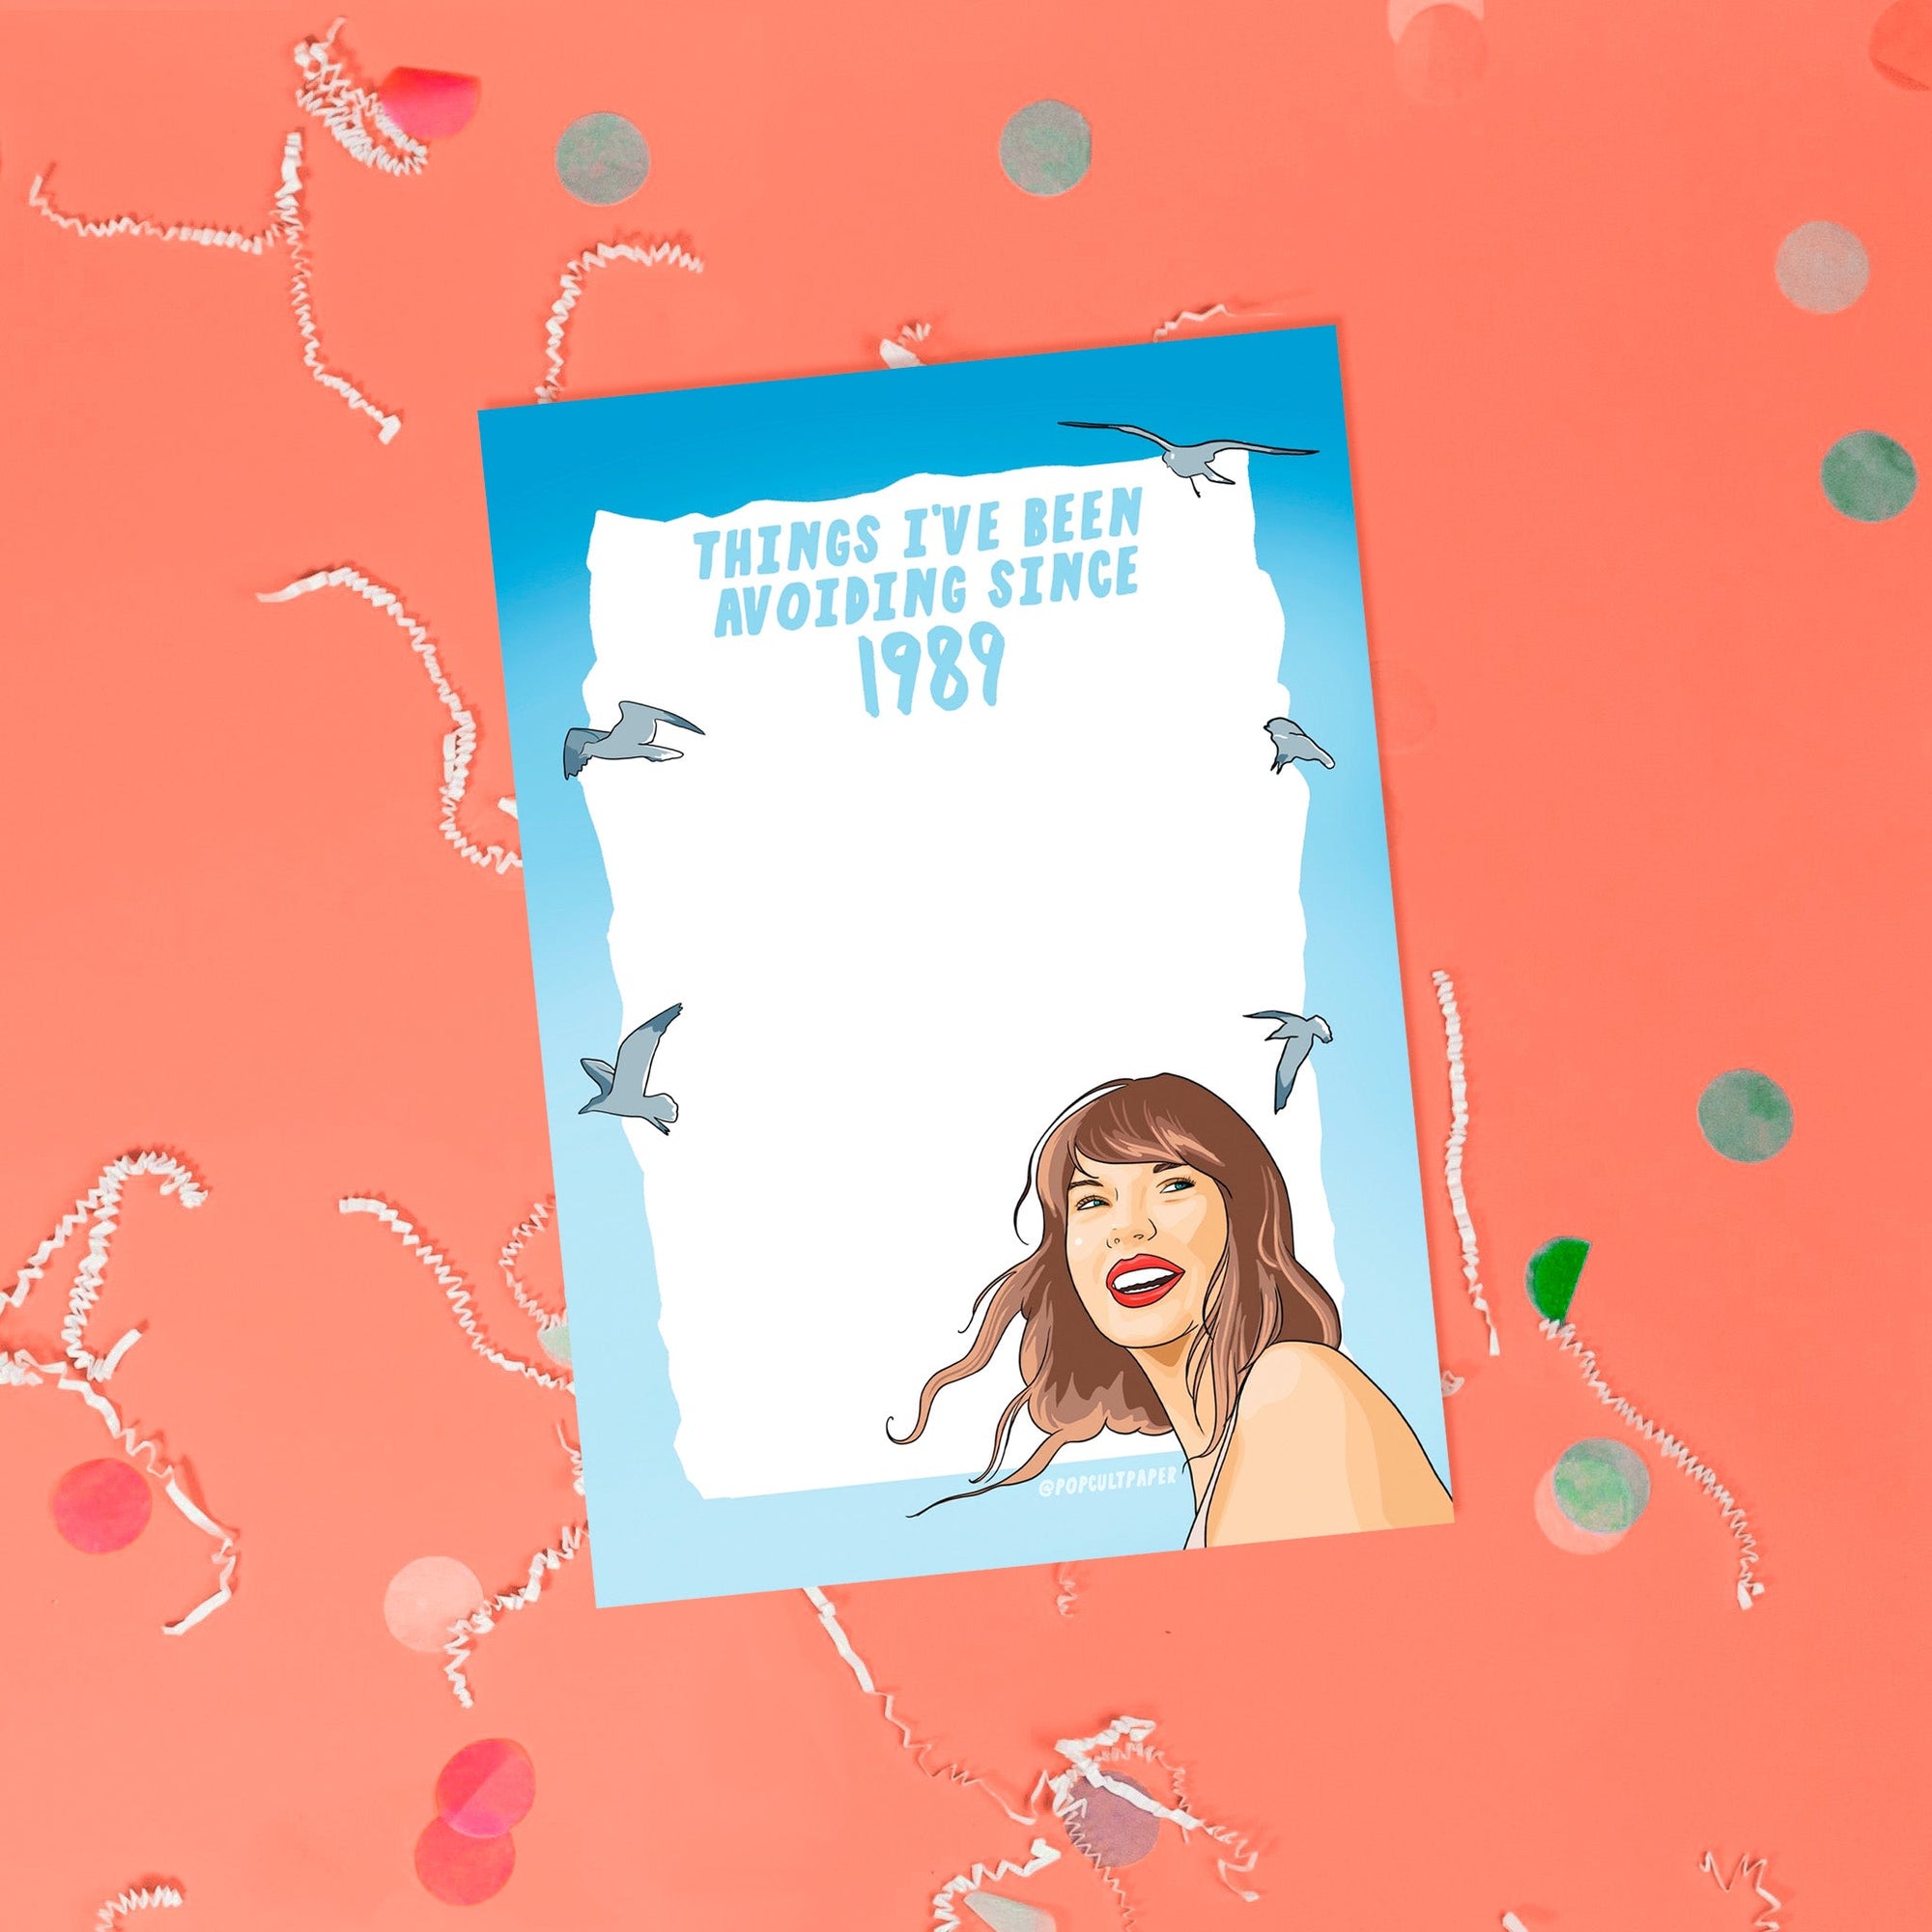 On a coral pink background sits a notepad with white crinkle and big, colorful confetti scattered around. This Taylor Swift inspired notepad is in shades of blues with a white background and it says at the top "THINGS I'VE BEEN AVOIDING SINCE 1989" in blue lettering and there is an illustration of Taylor Swift at the bottom with seagulls flying around.